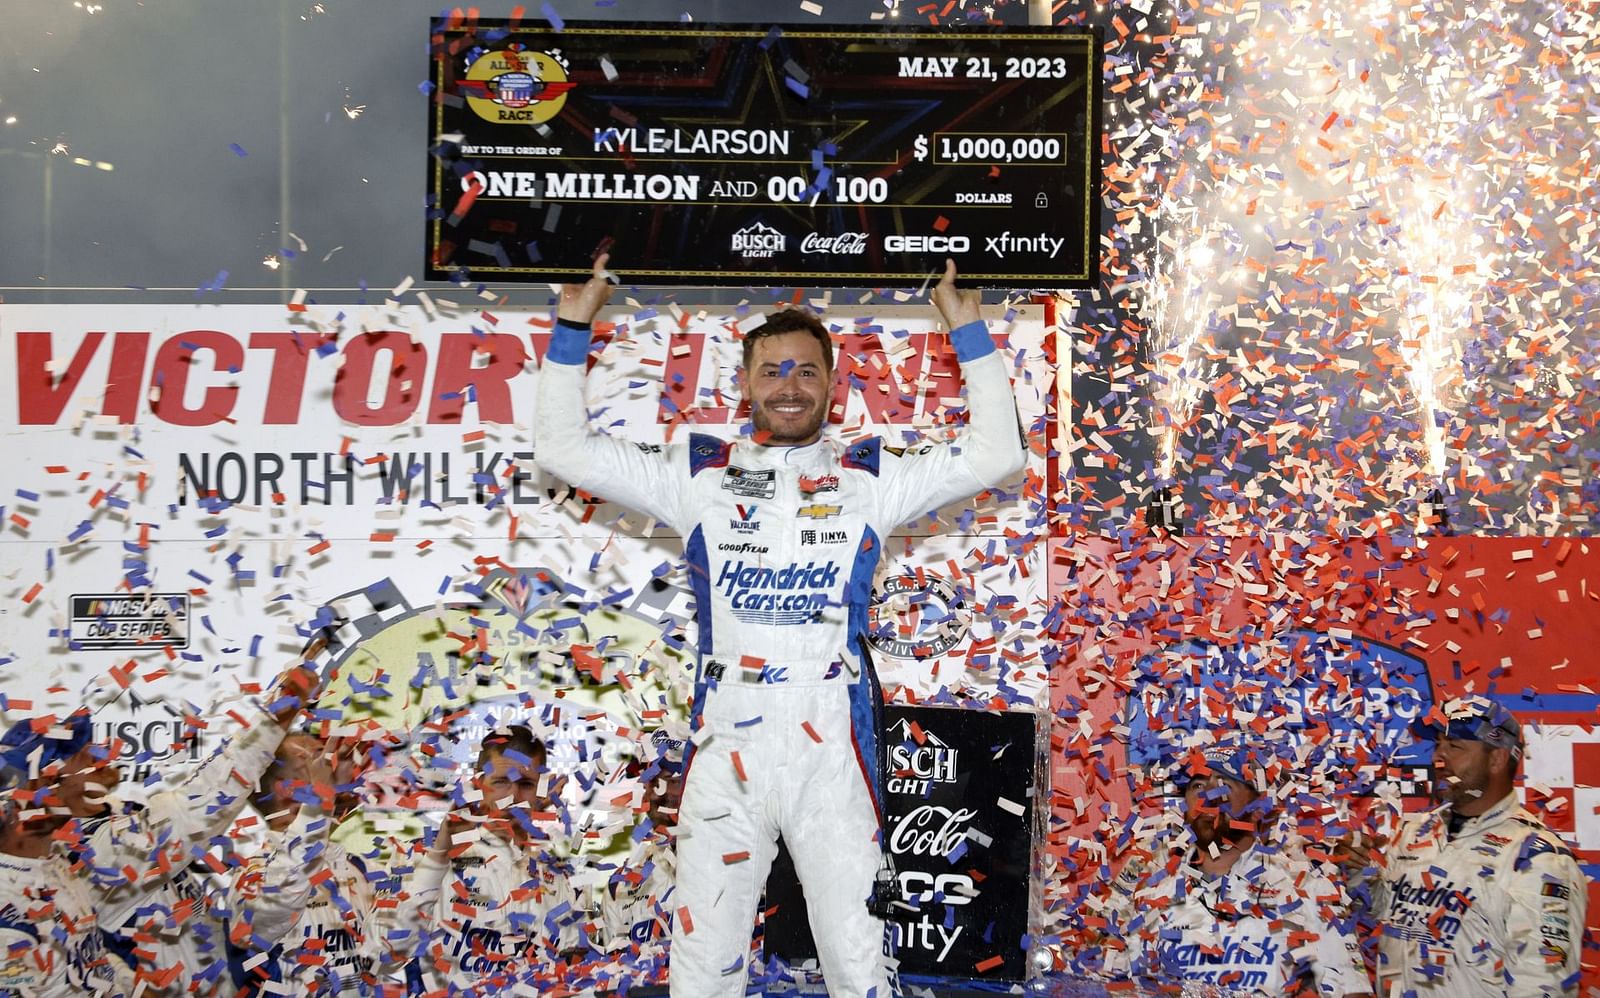 What was the breakup of the NASCAR All Star race payout? Exploring the